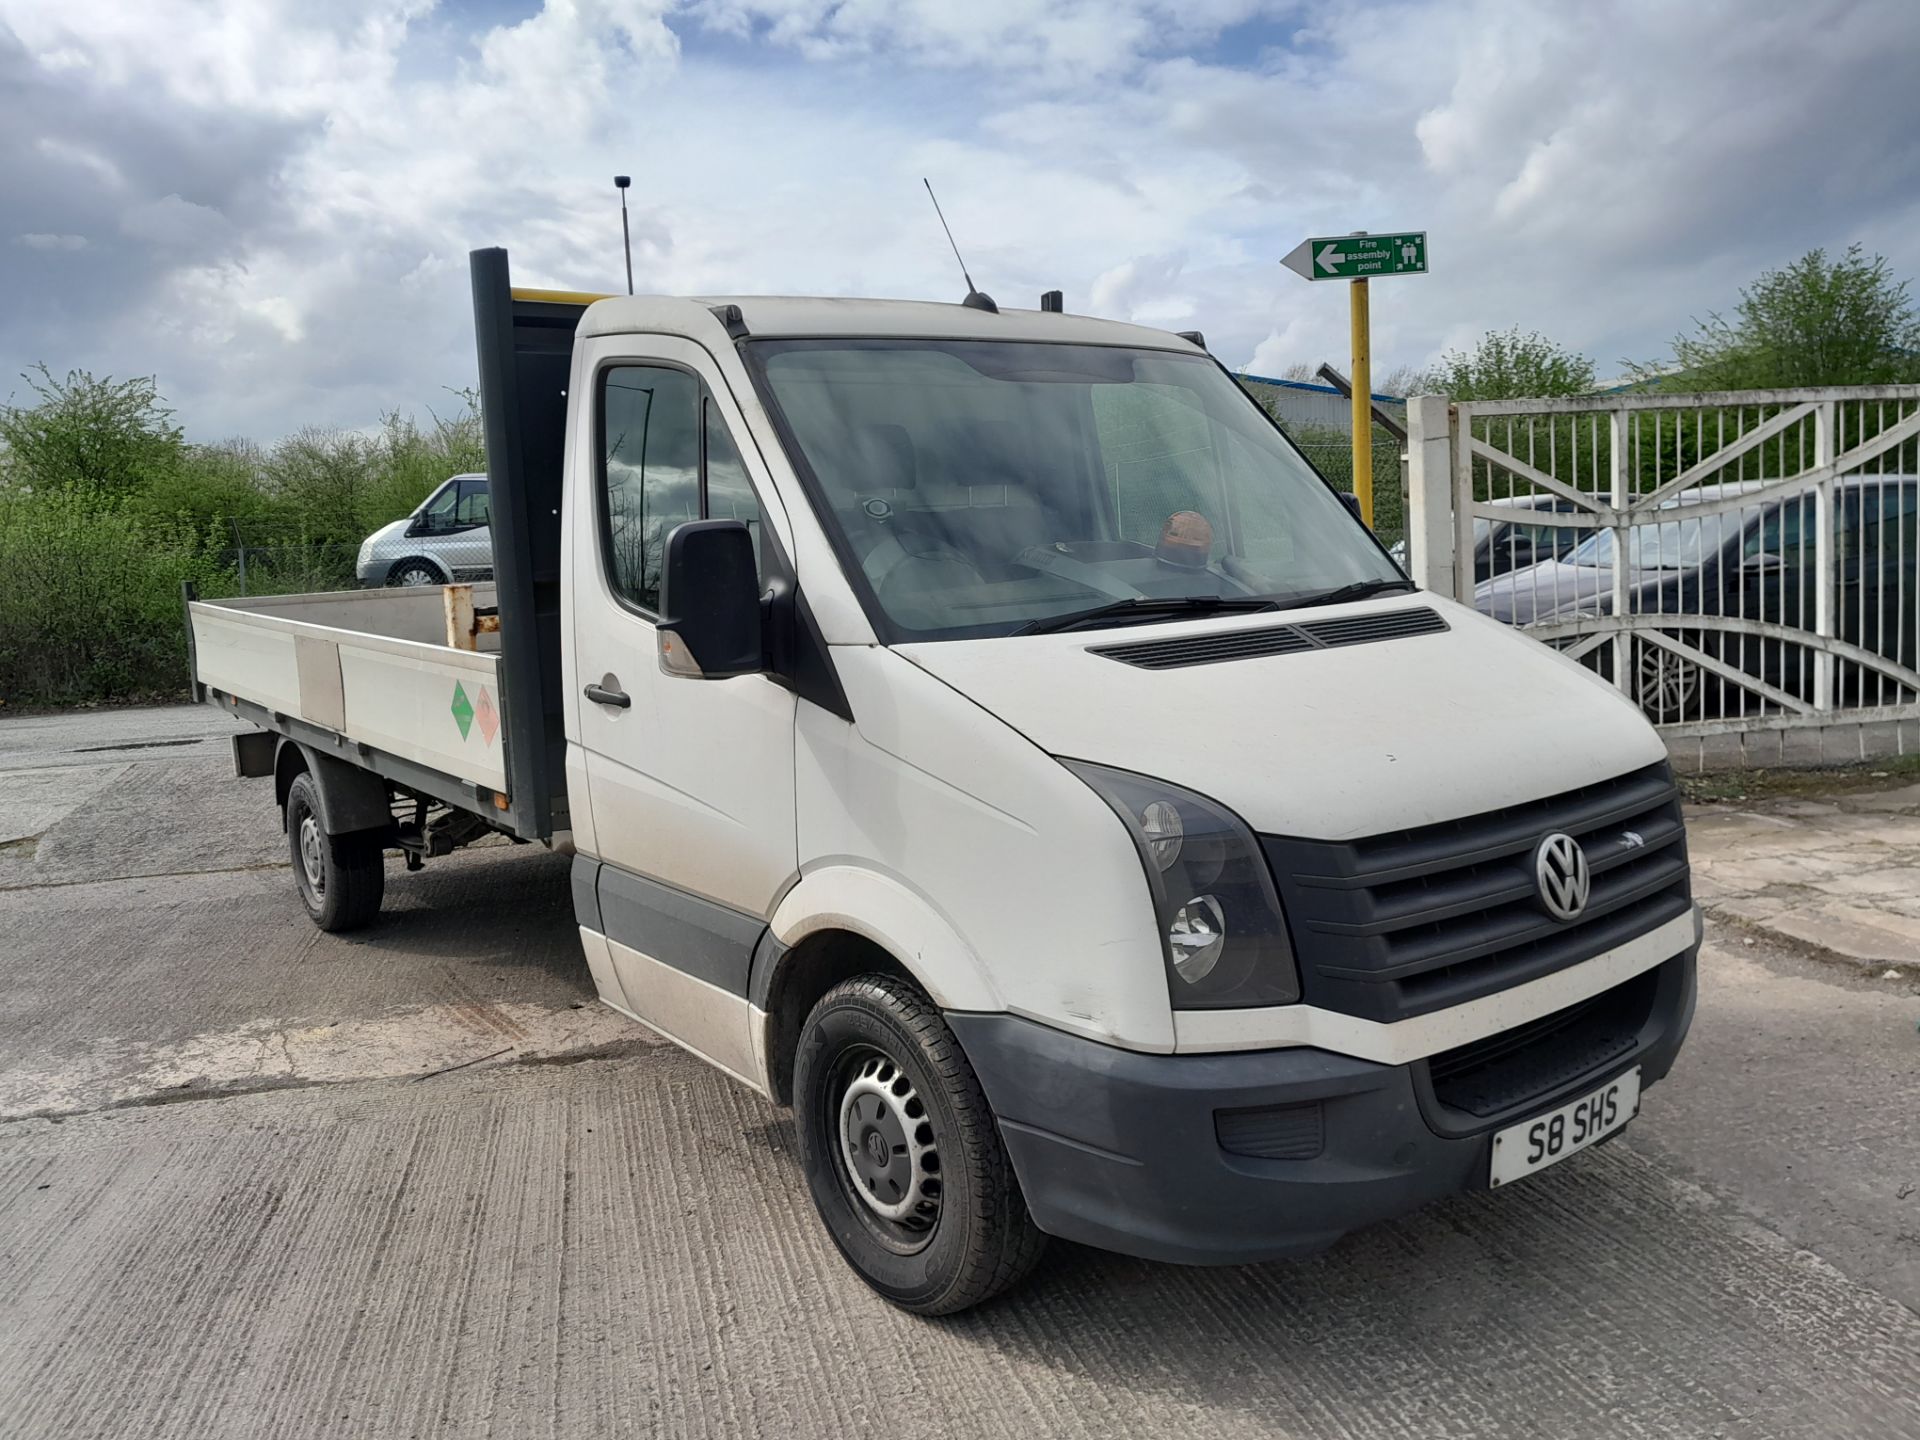 Volkswagen Crafter CR35 LWB 2.0 TDI Double Cab Dropside Van, with Ingimex Dropside body,